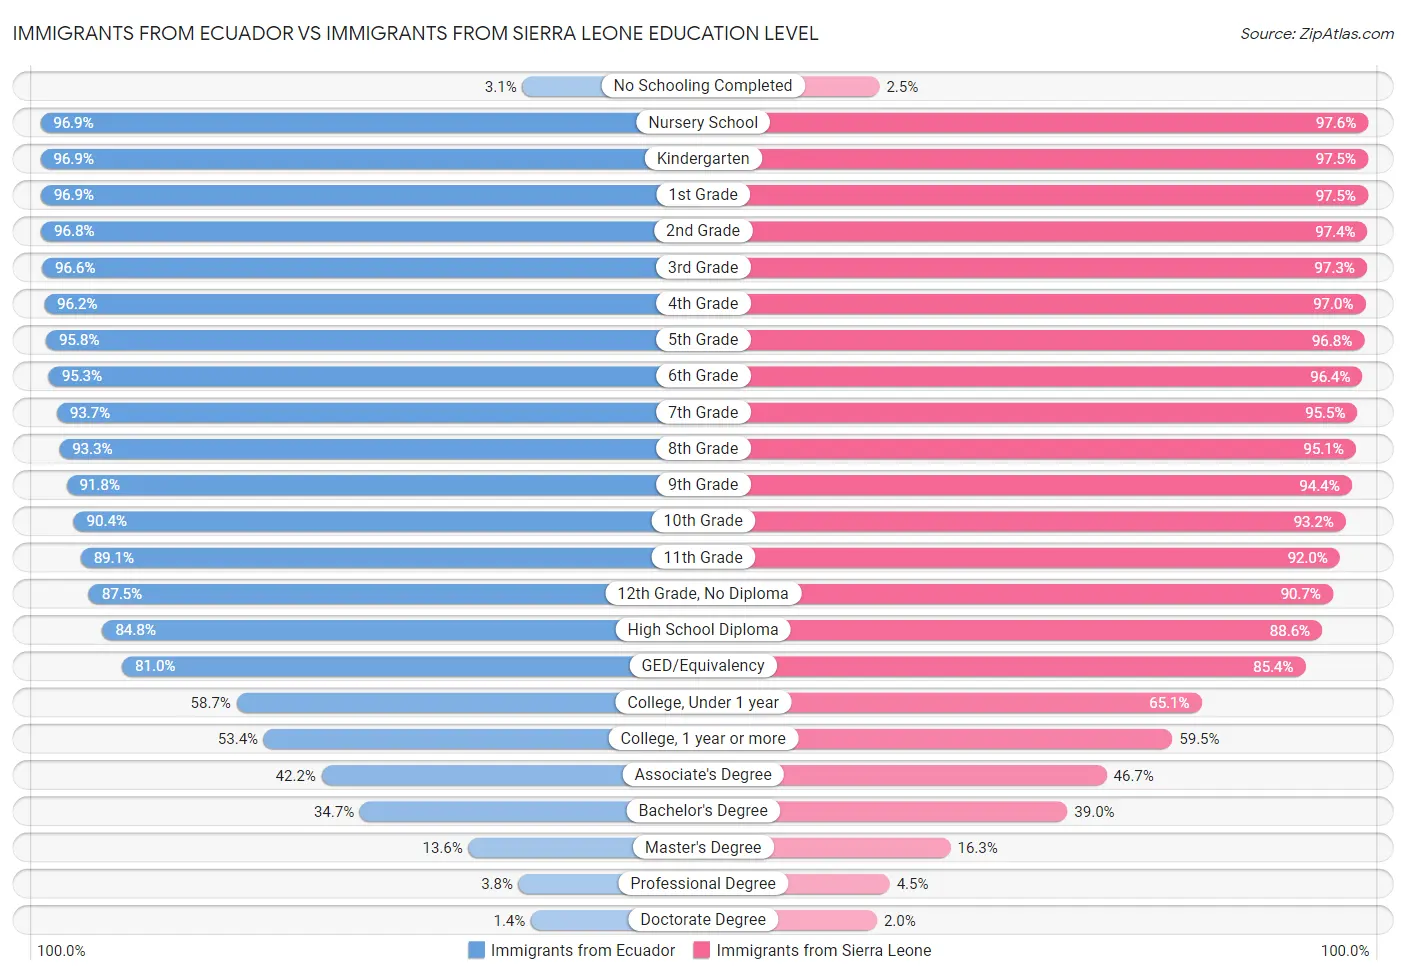 Immigrants from Ecuador vs Immigrants from Sierra Leone Education Level